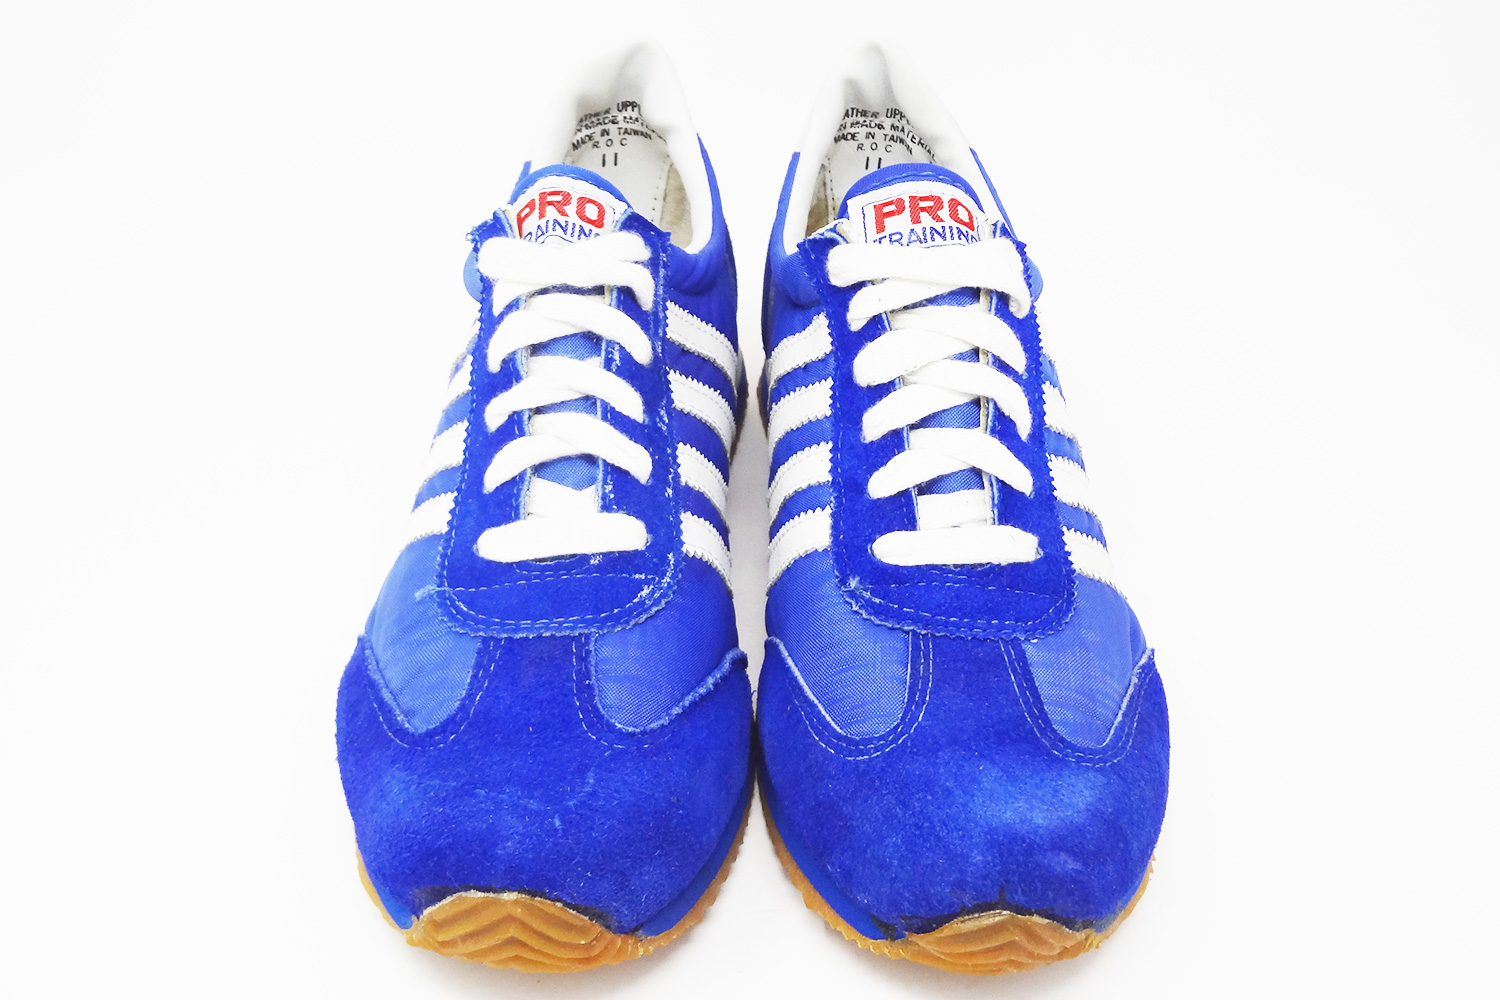 Vintage 1970s Pro Training sneakers front mid @ The Deffest